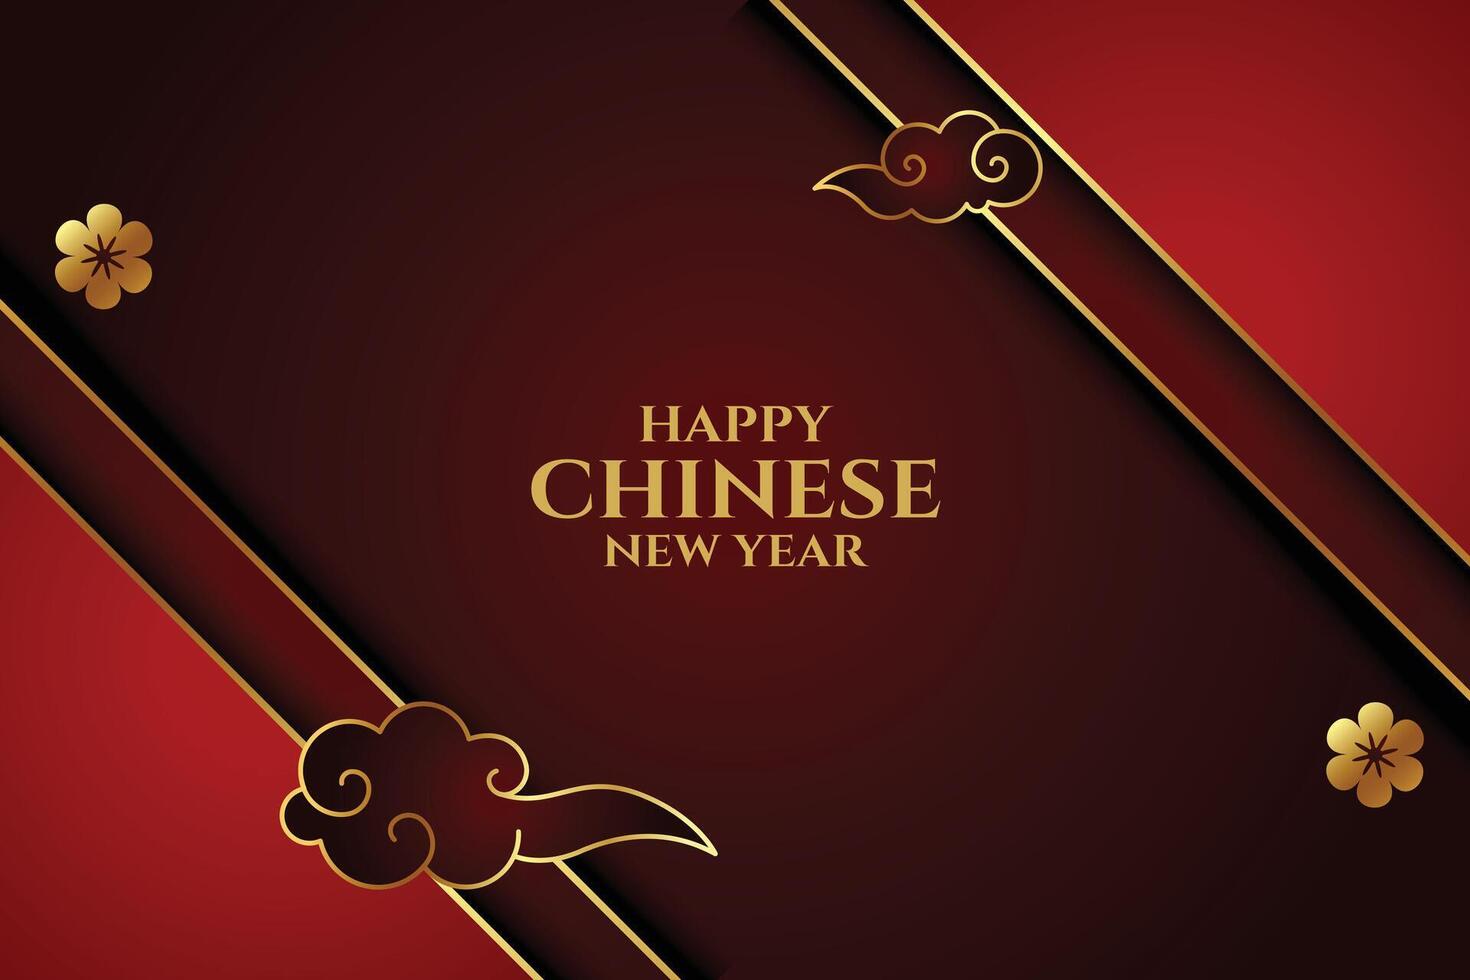 stylish chinese new year red background with clouds and flowers vector